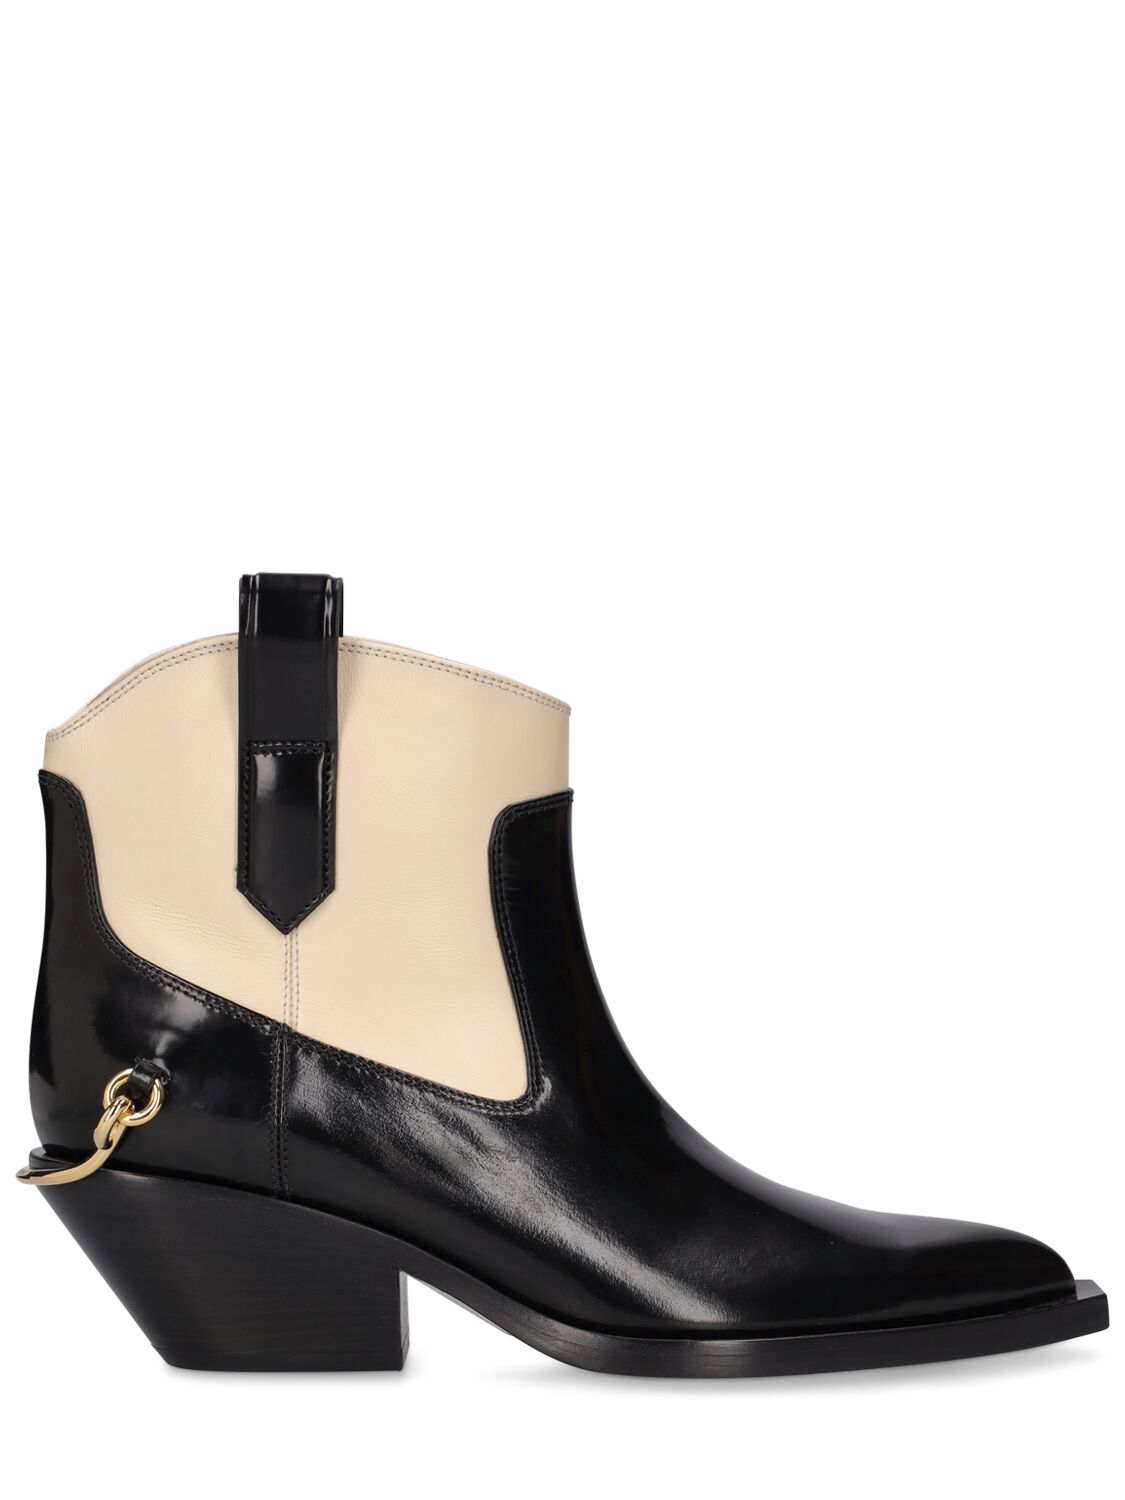 ZIMMERMANN 45MM DUNCAN TALL LEATHER BOOTS